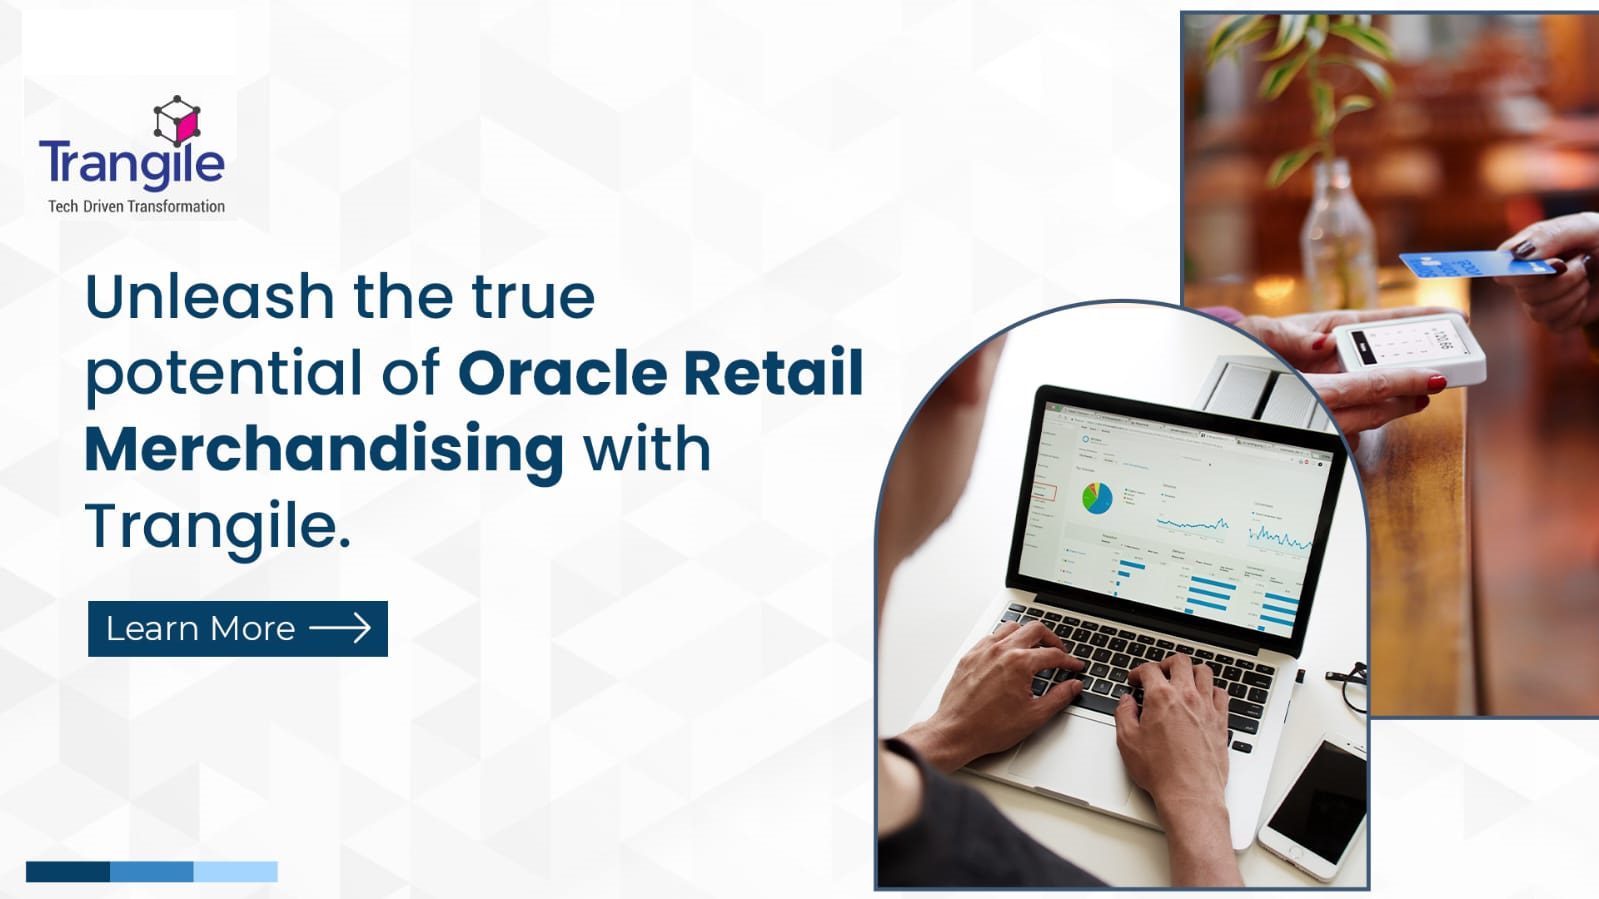 Unleash the true potential of Oracle Retail Merchandising with Trangile